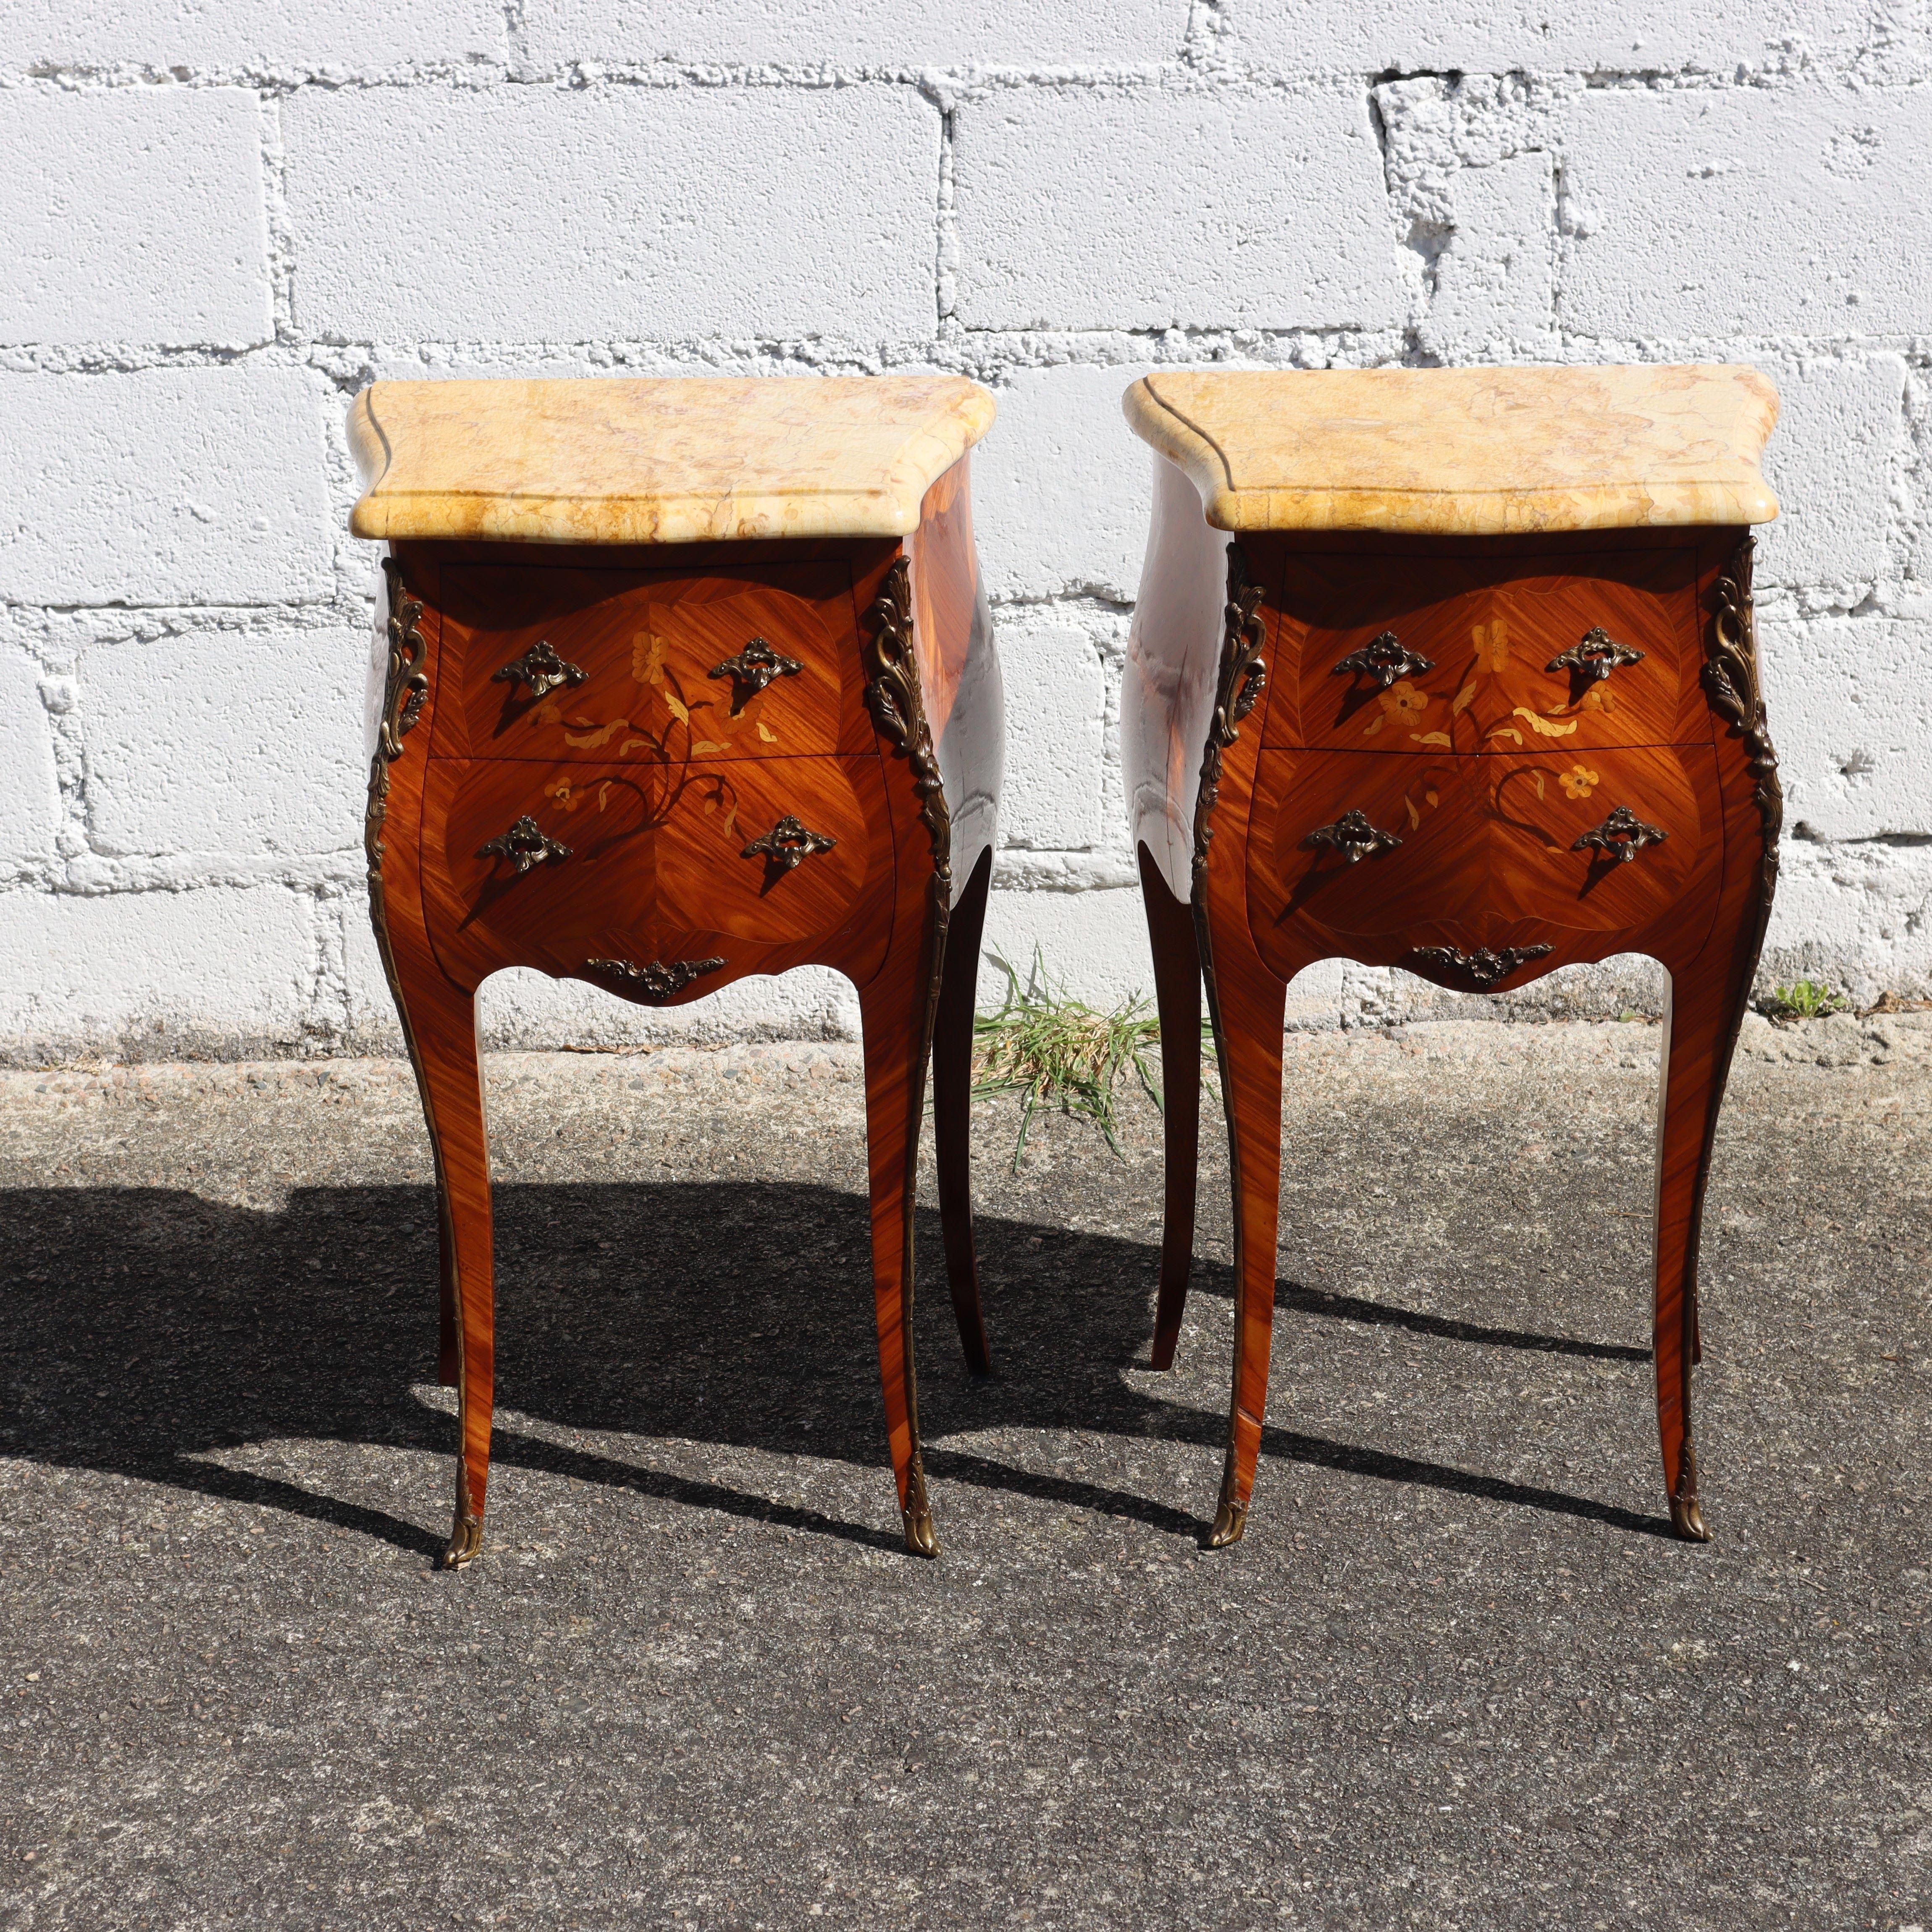 Pair of 2 Vintage French Louis XV Rosewood Marquetry Marble Top Nightstands from the 50s
Cabinet Maker Masterpiece - Wonderful Rosewood Marquetry with floral Inlay Work.
Equipped with 2 Drawers decorated with Brass Handles with ormolu